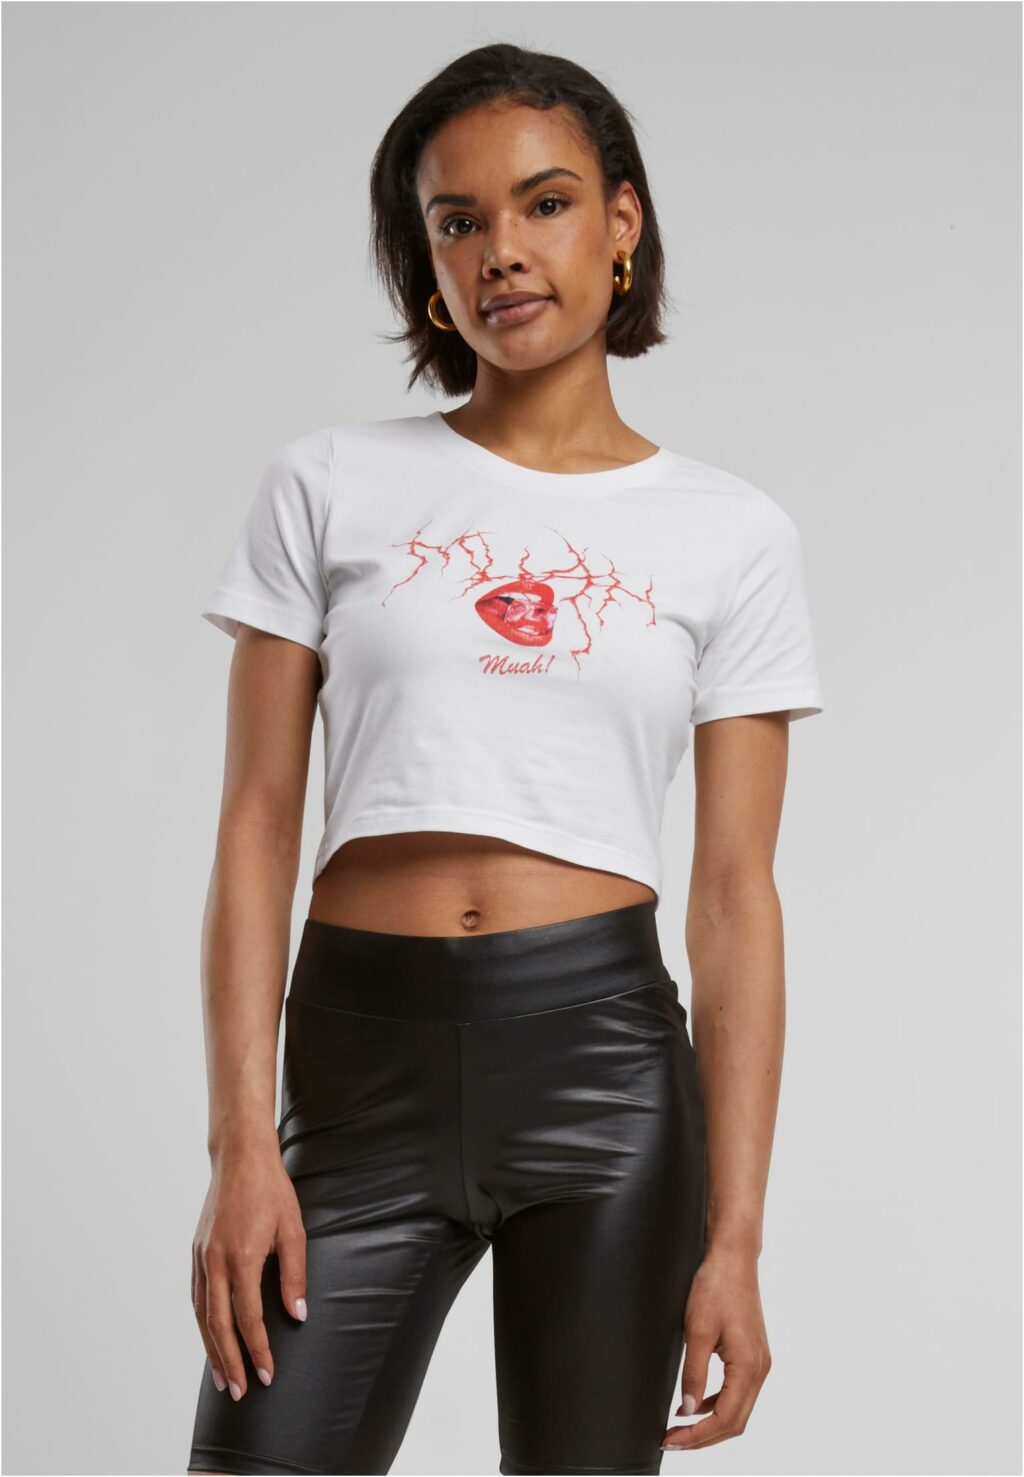 Muah Cropped Tee white MST010